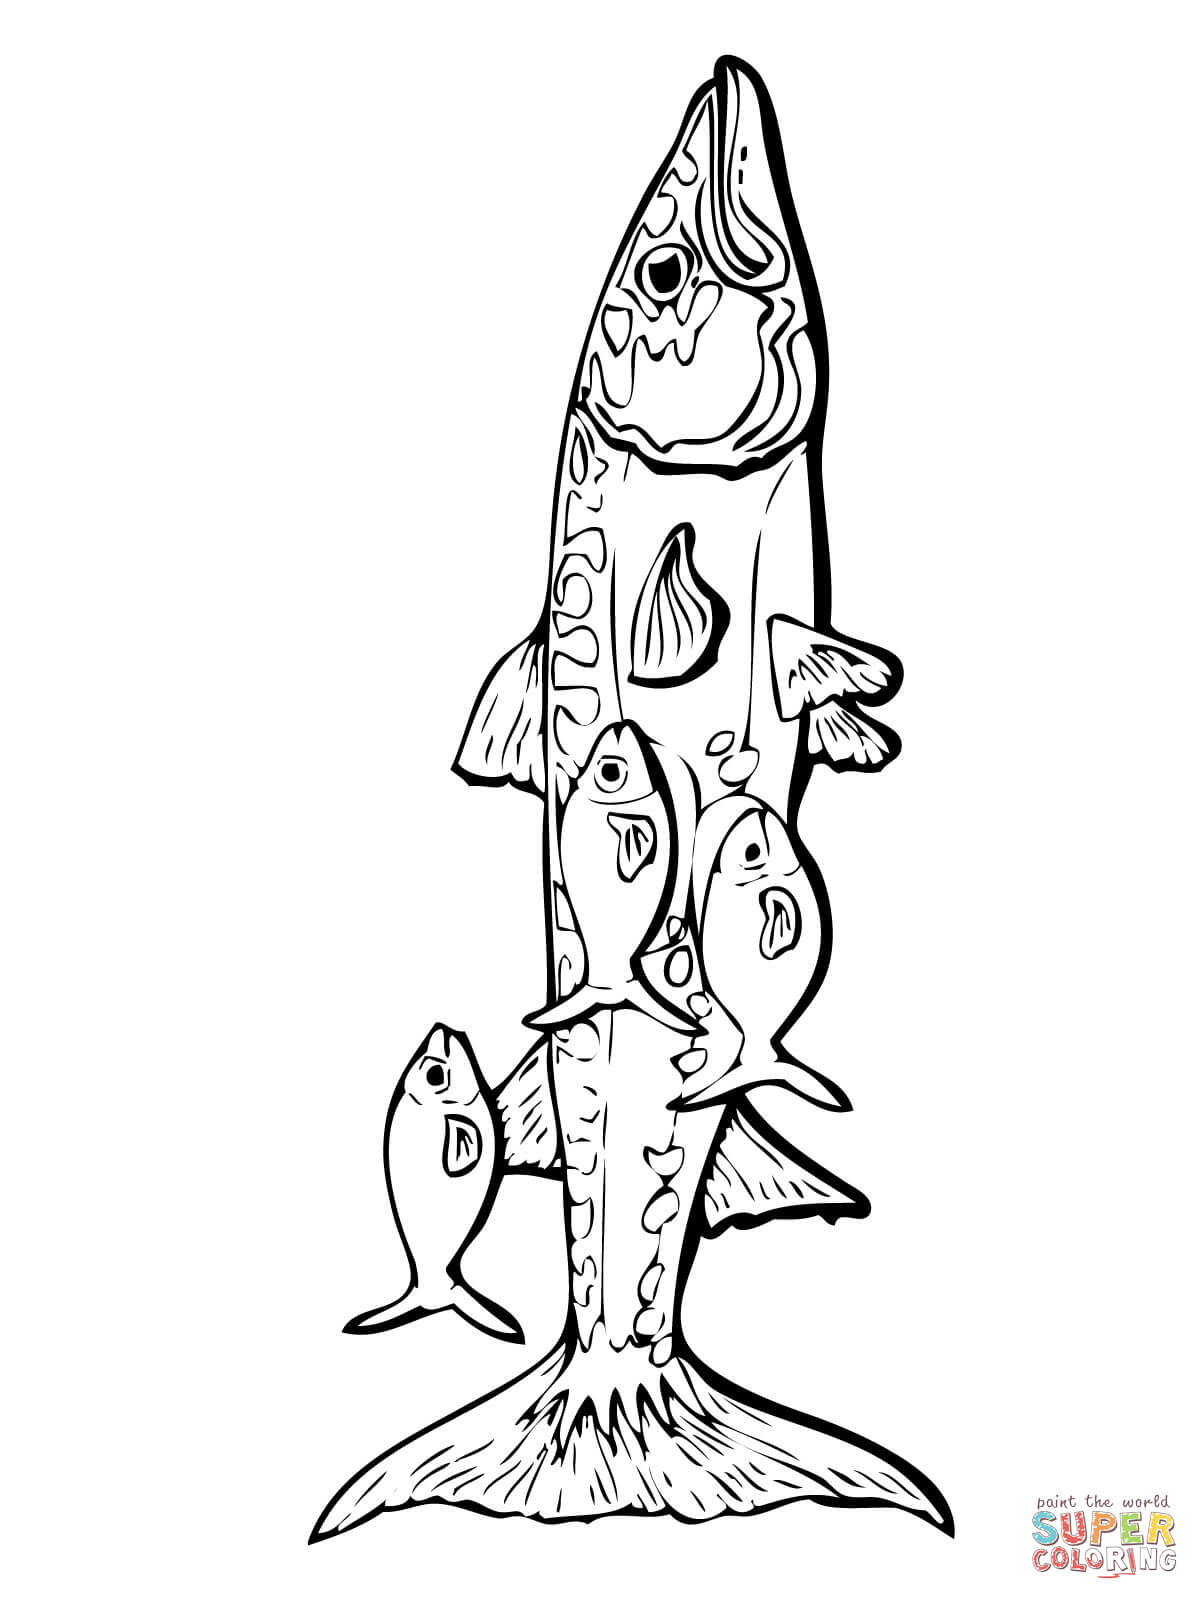 Barracuda and remora fishes coloring page free printable coloring pages